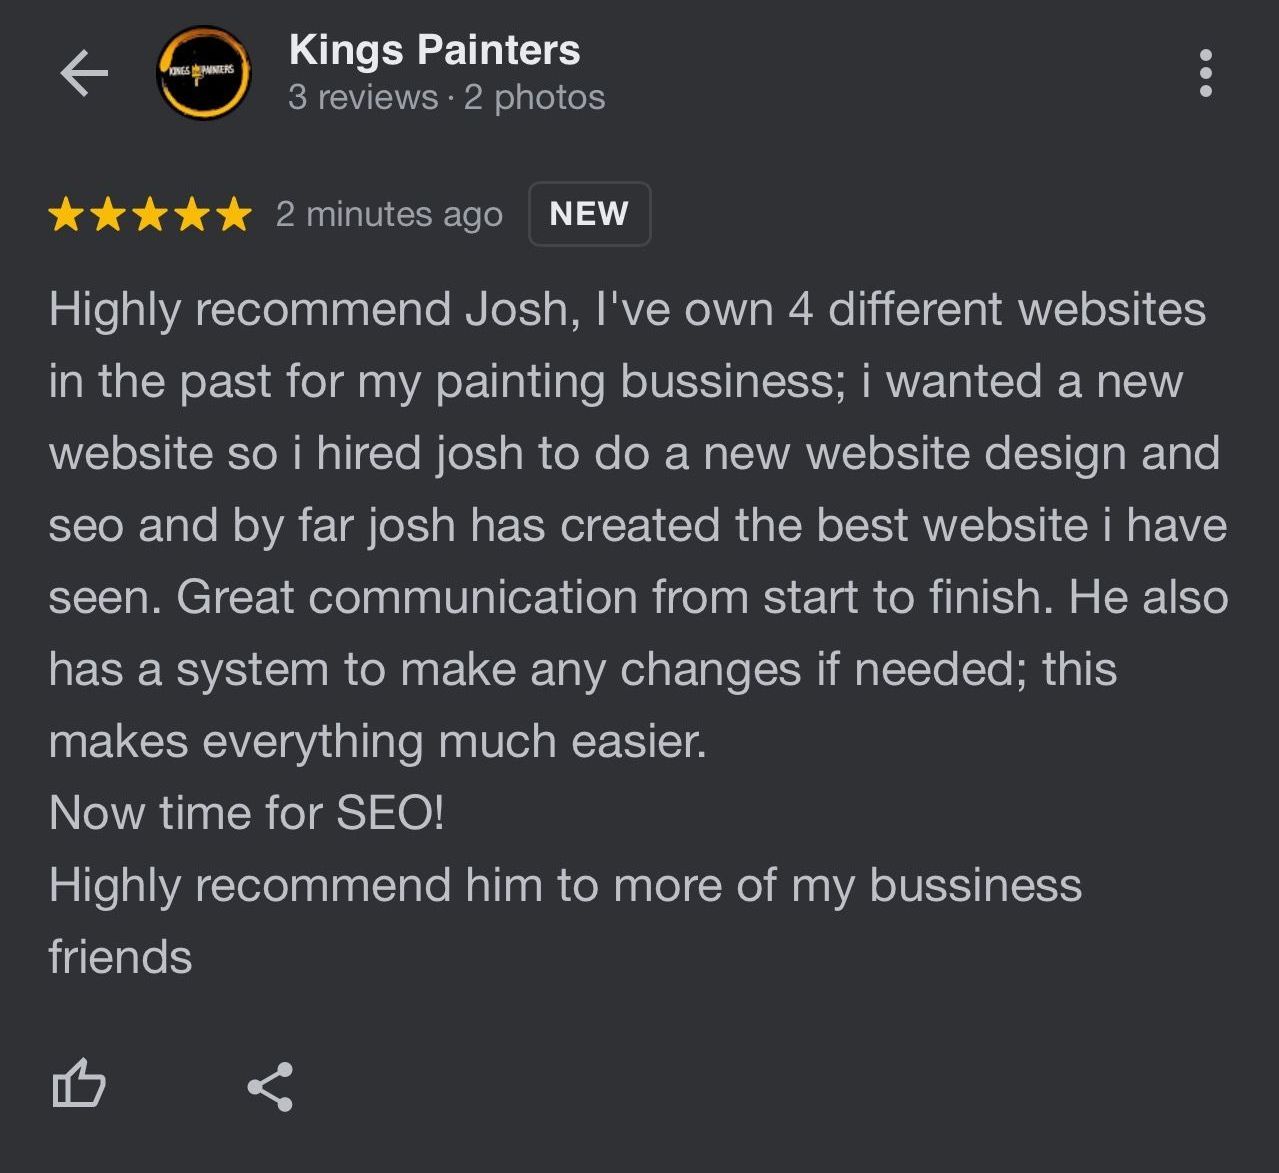 A google review for kings painters shows a 5 star rating